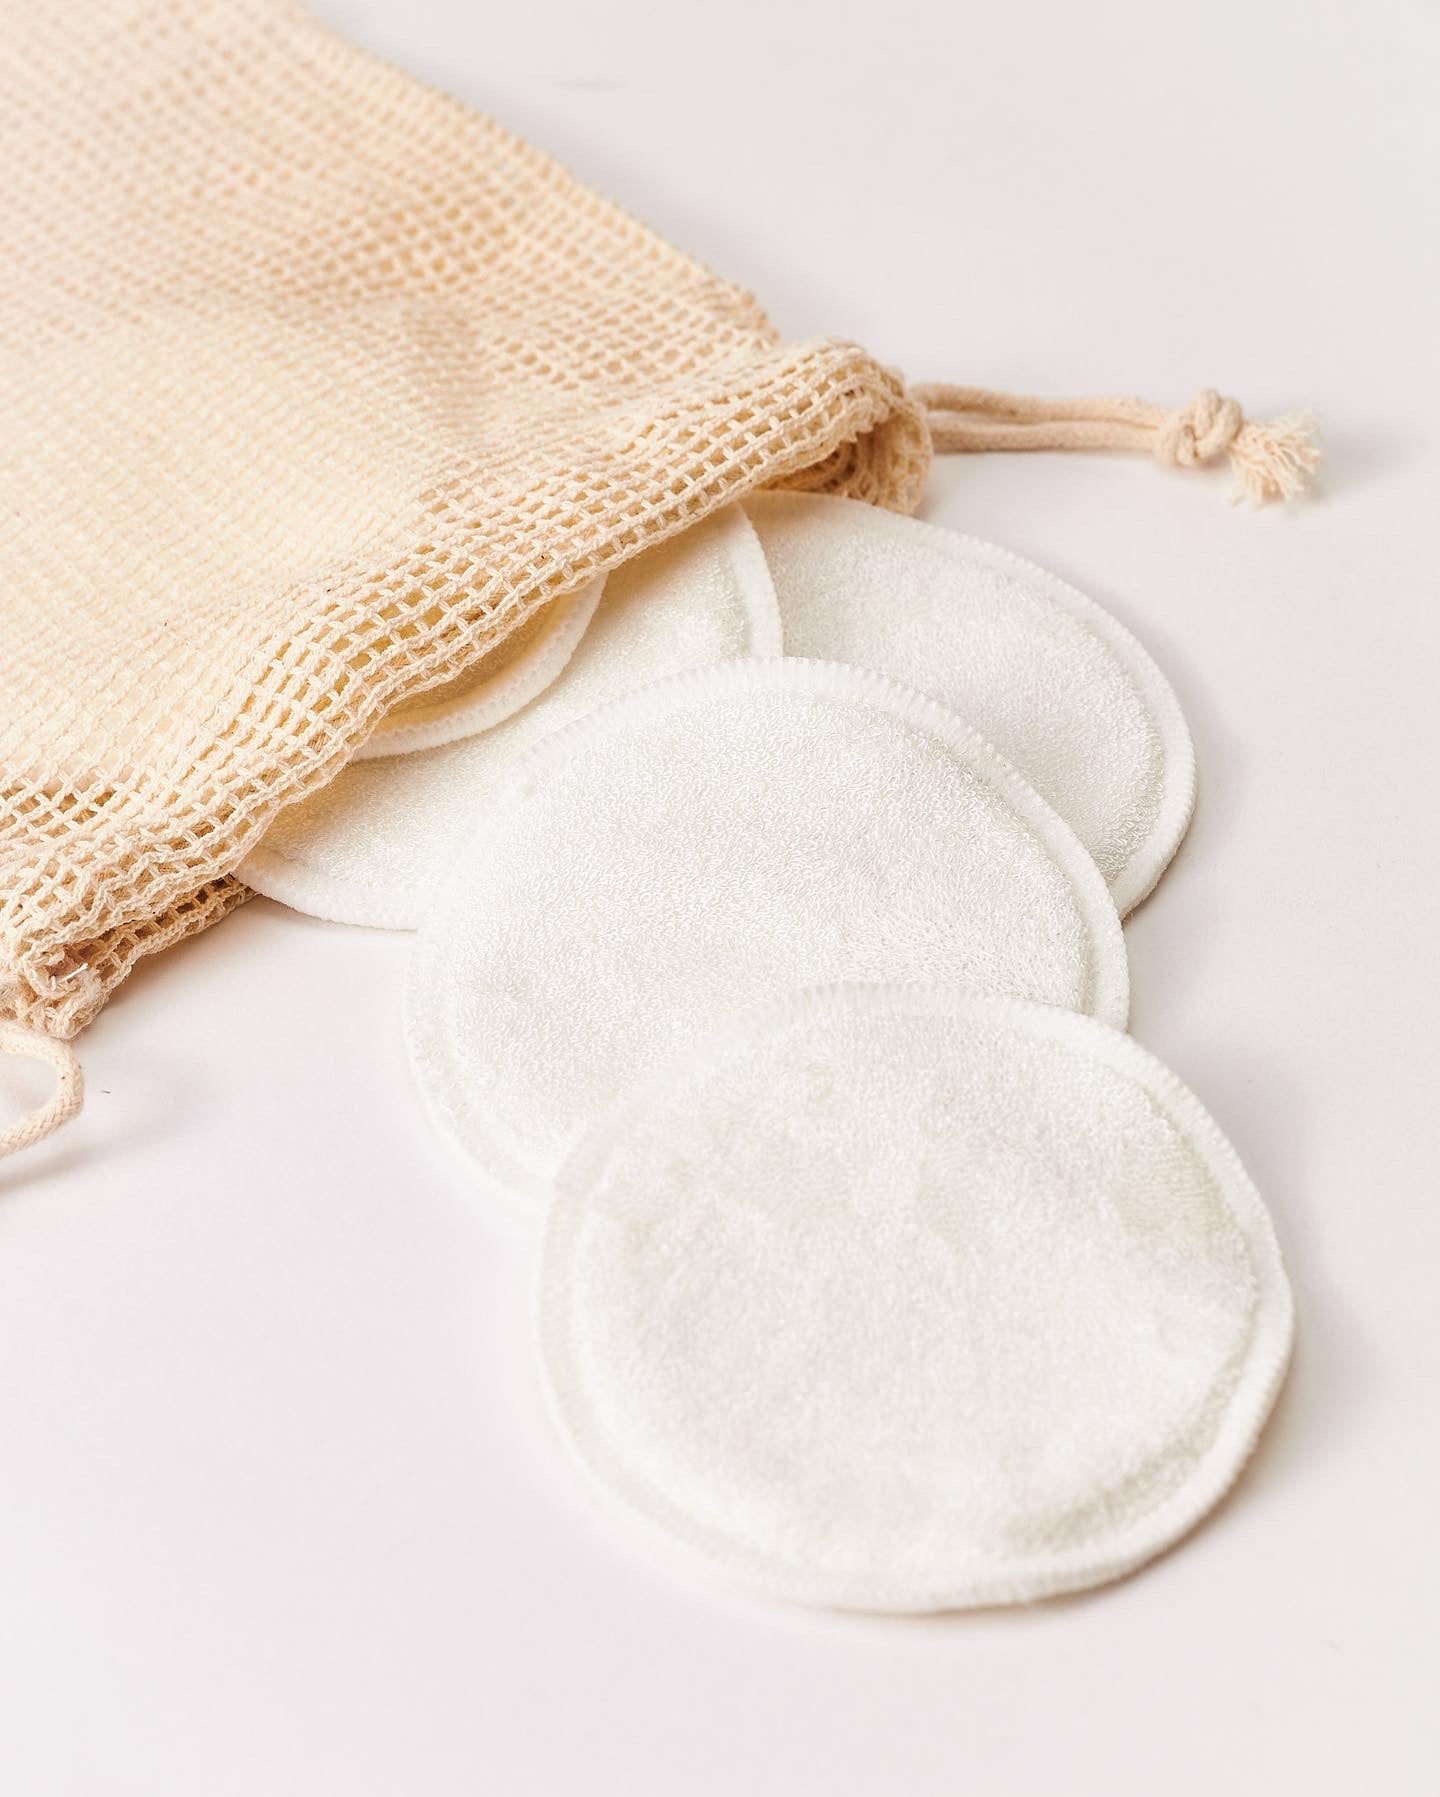 Reusable Bamboo Cotton Cleansing Pads